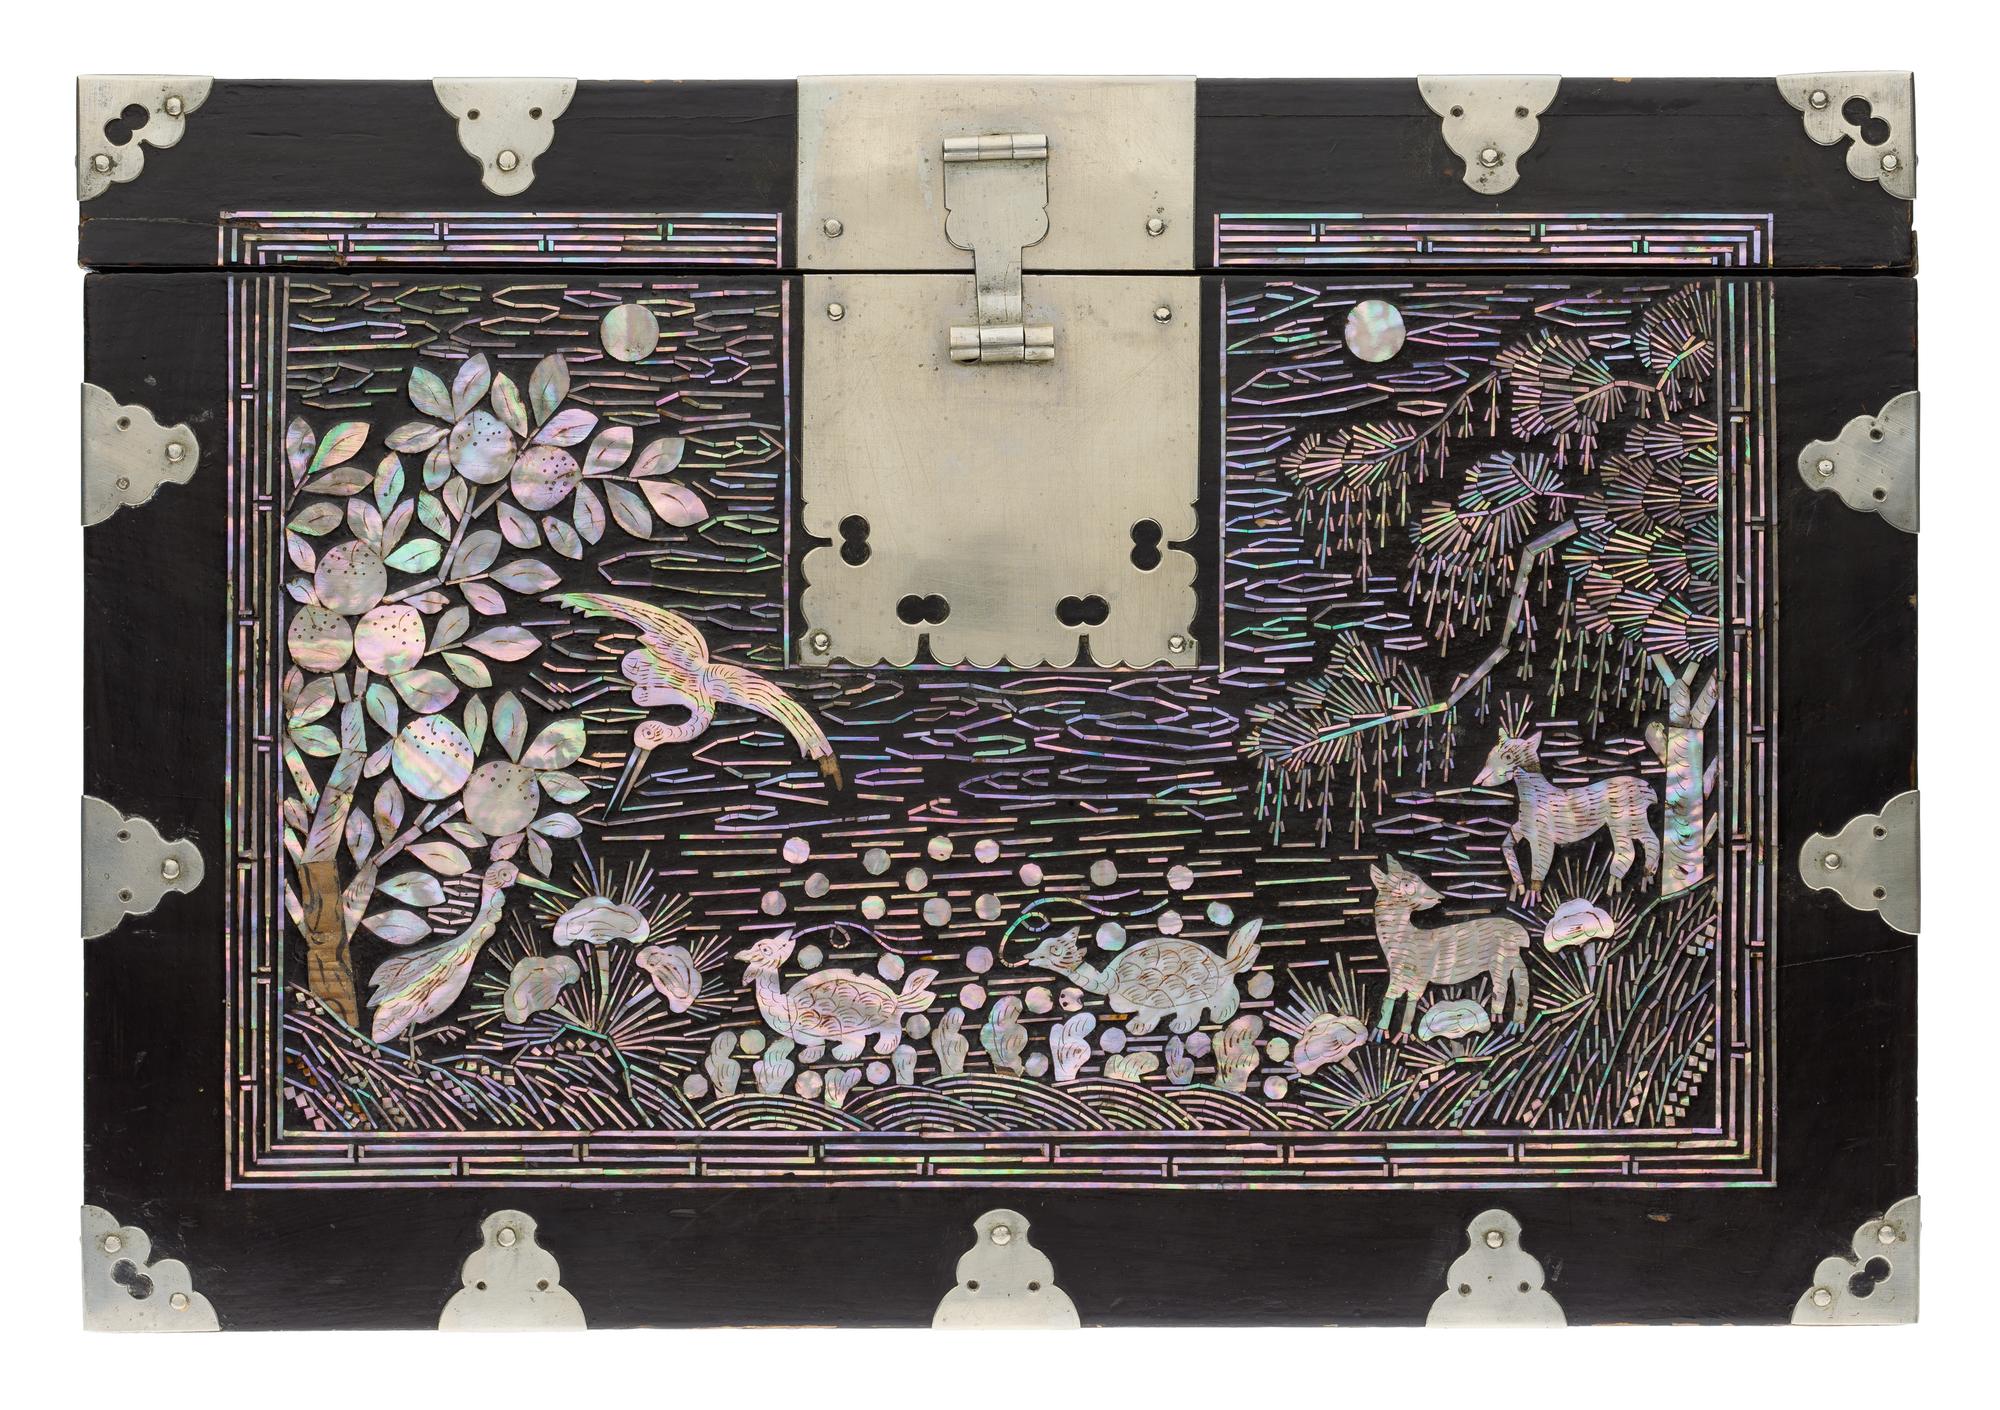 Lidded document box (soryu ham) of black lacquered wood inlaid with mother-of-pearl, with metal mounts and handles: Korea, Joseon Dynasty, late 19th century.